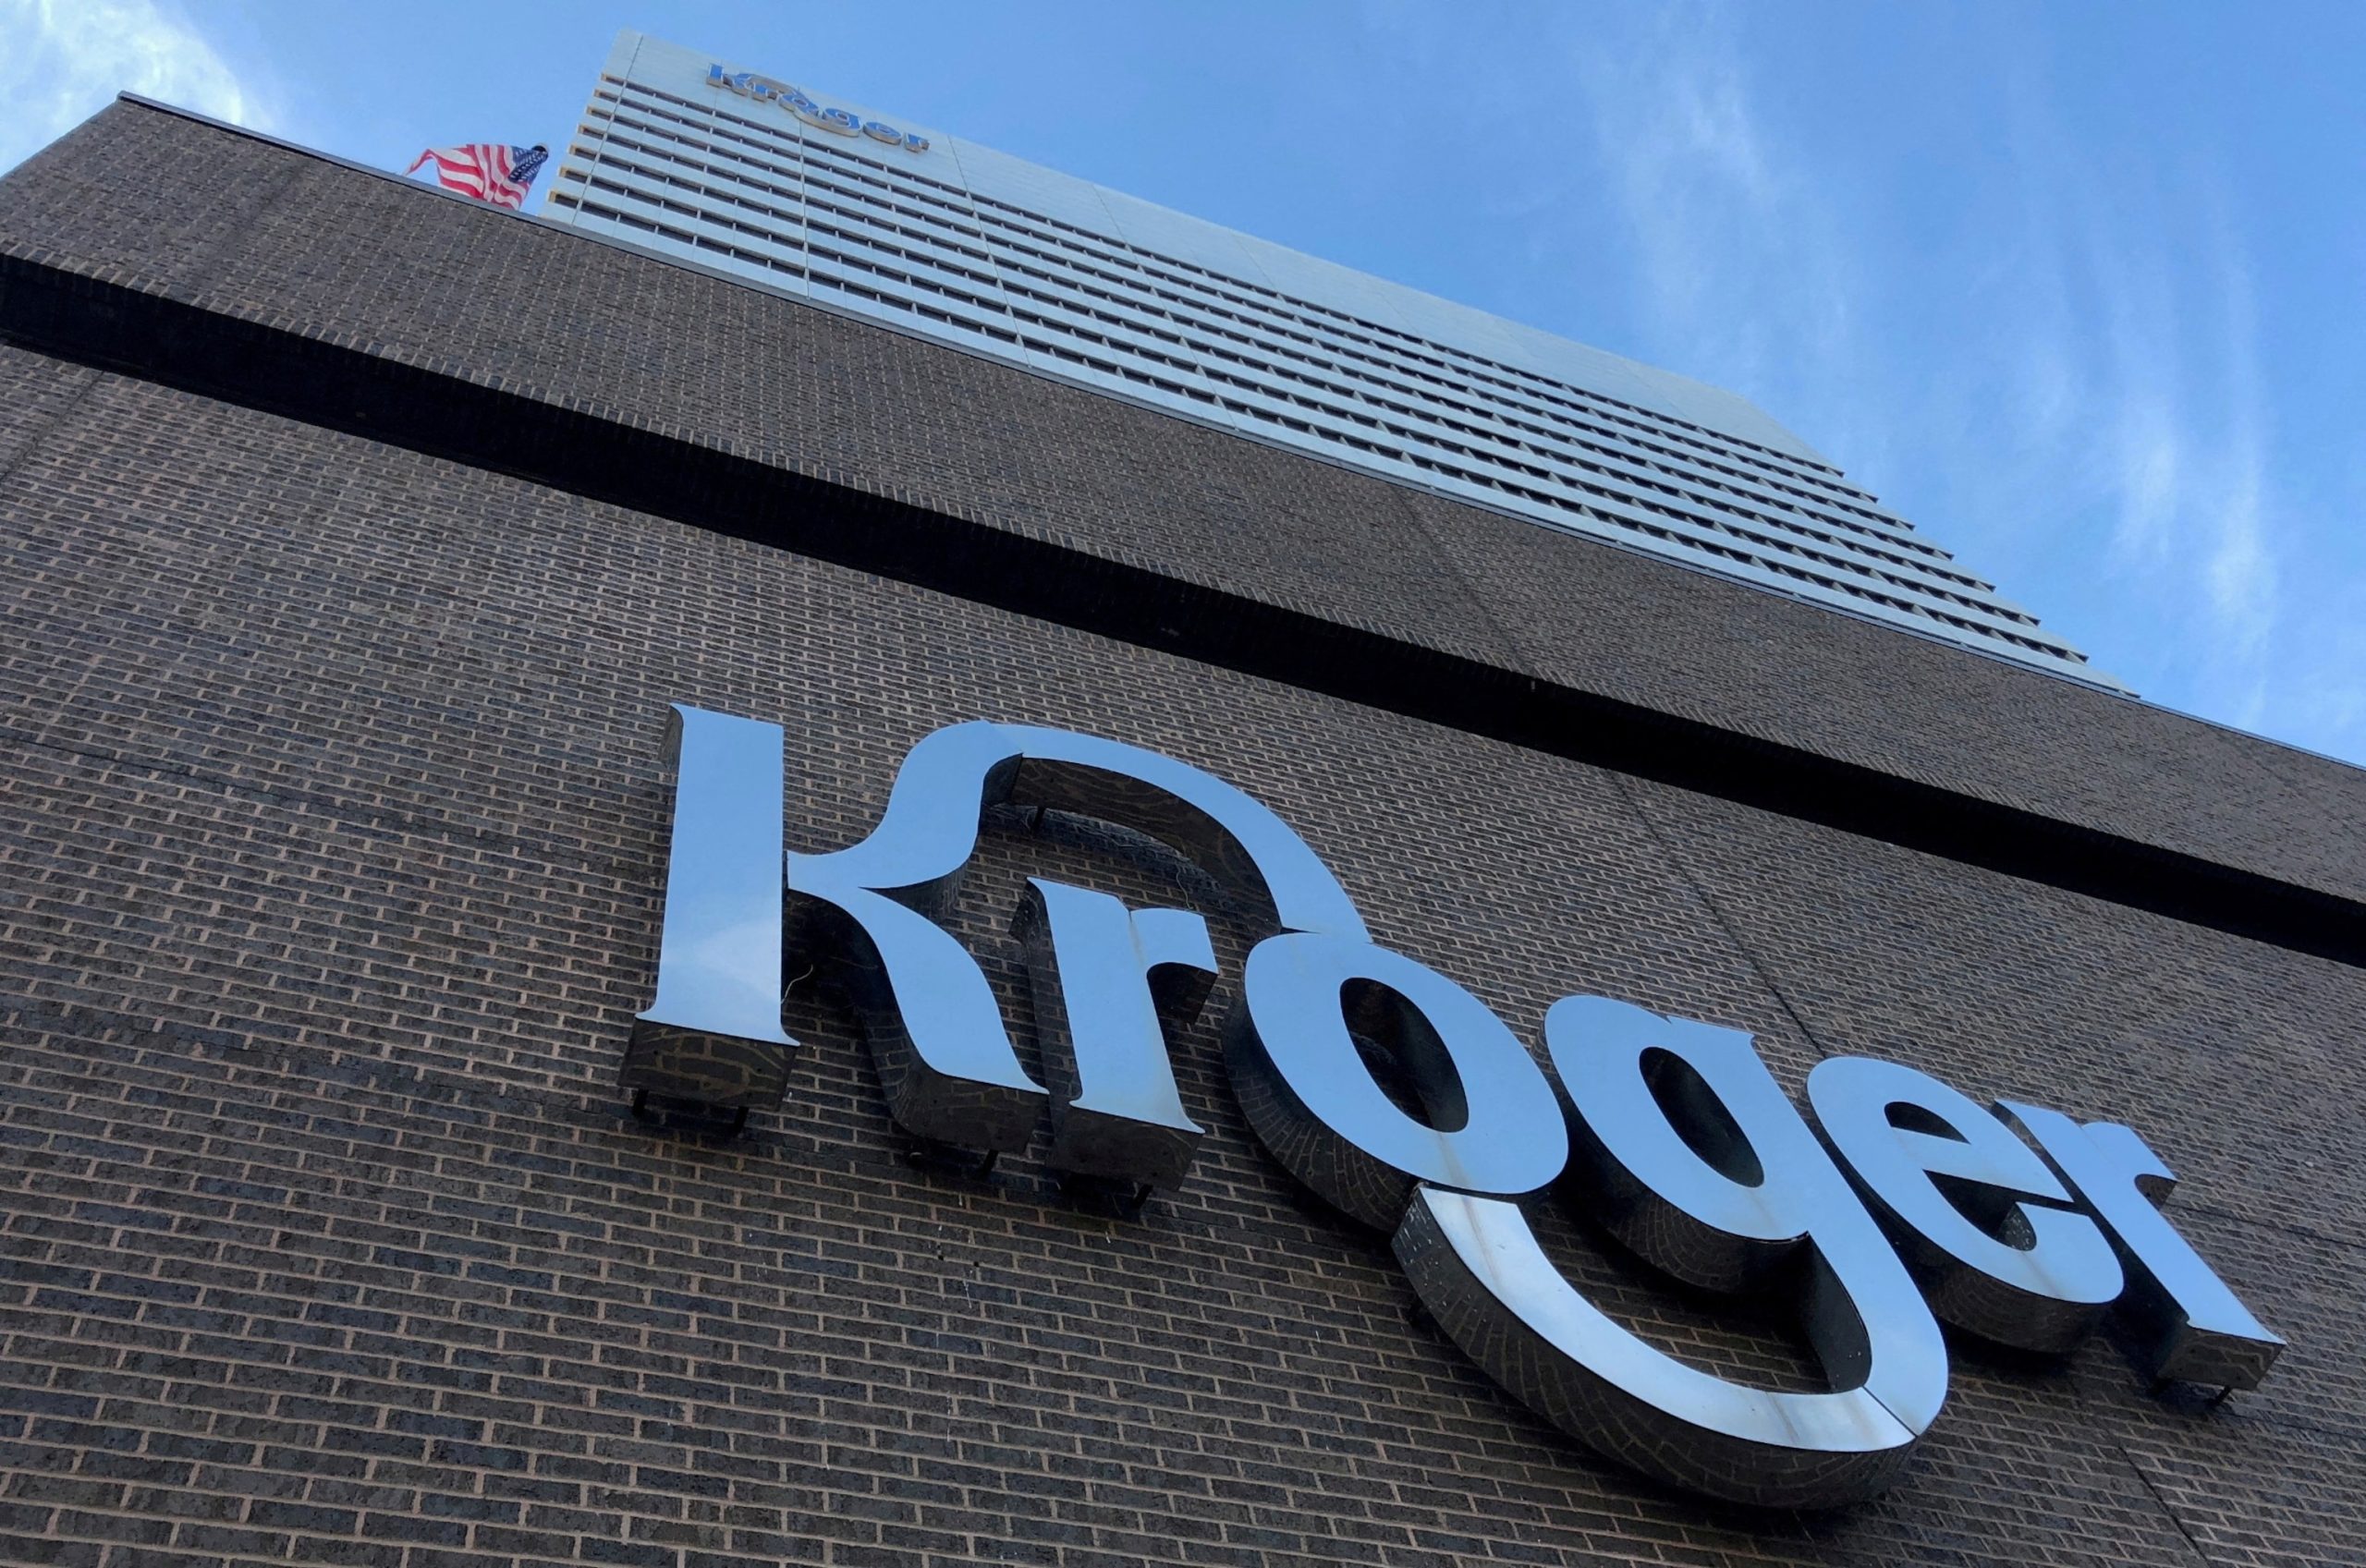 Federal Trade Commission files lawsuit to prevent merger between Kroger and Albertsons